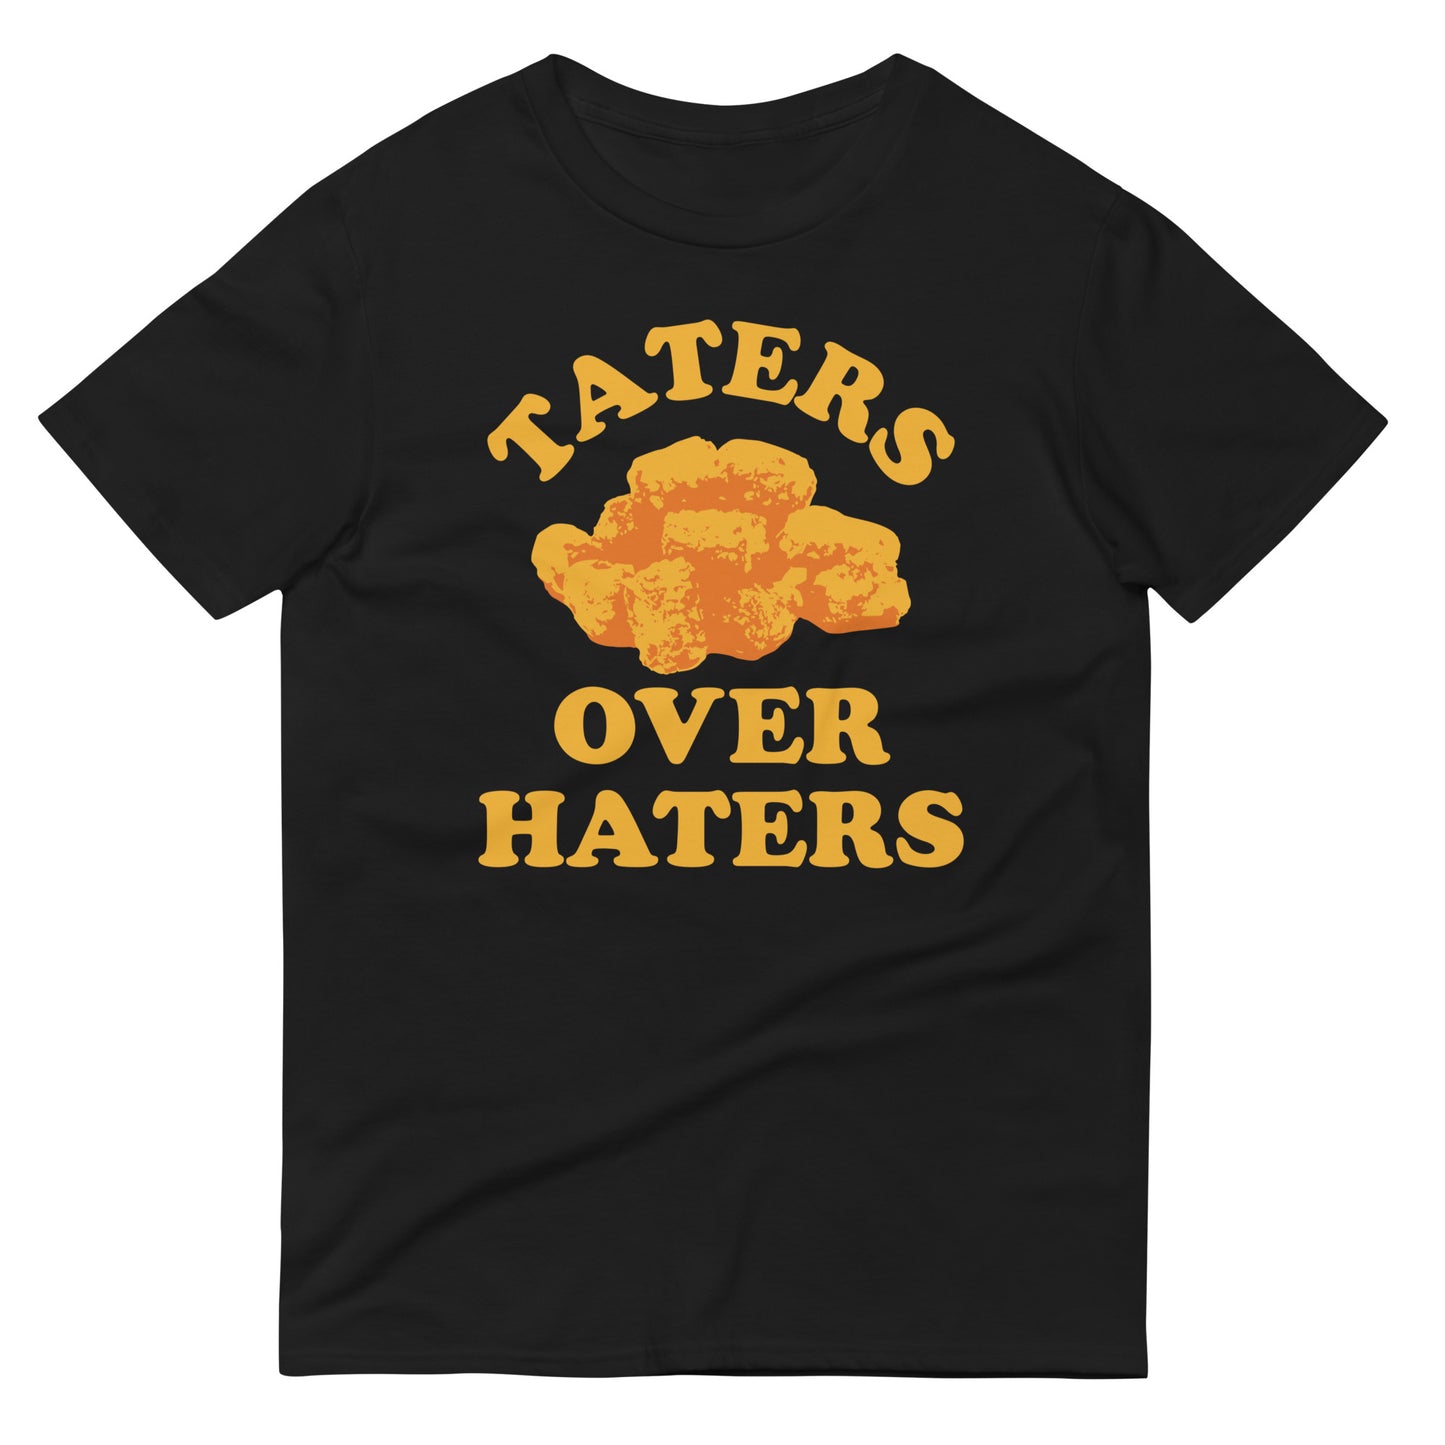 Taters Over Haters Men's Signature Tee